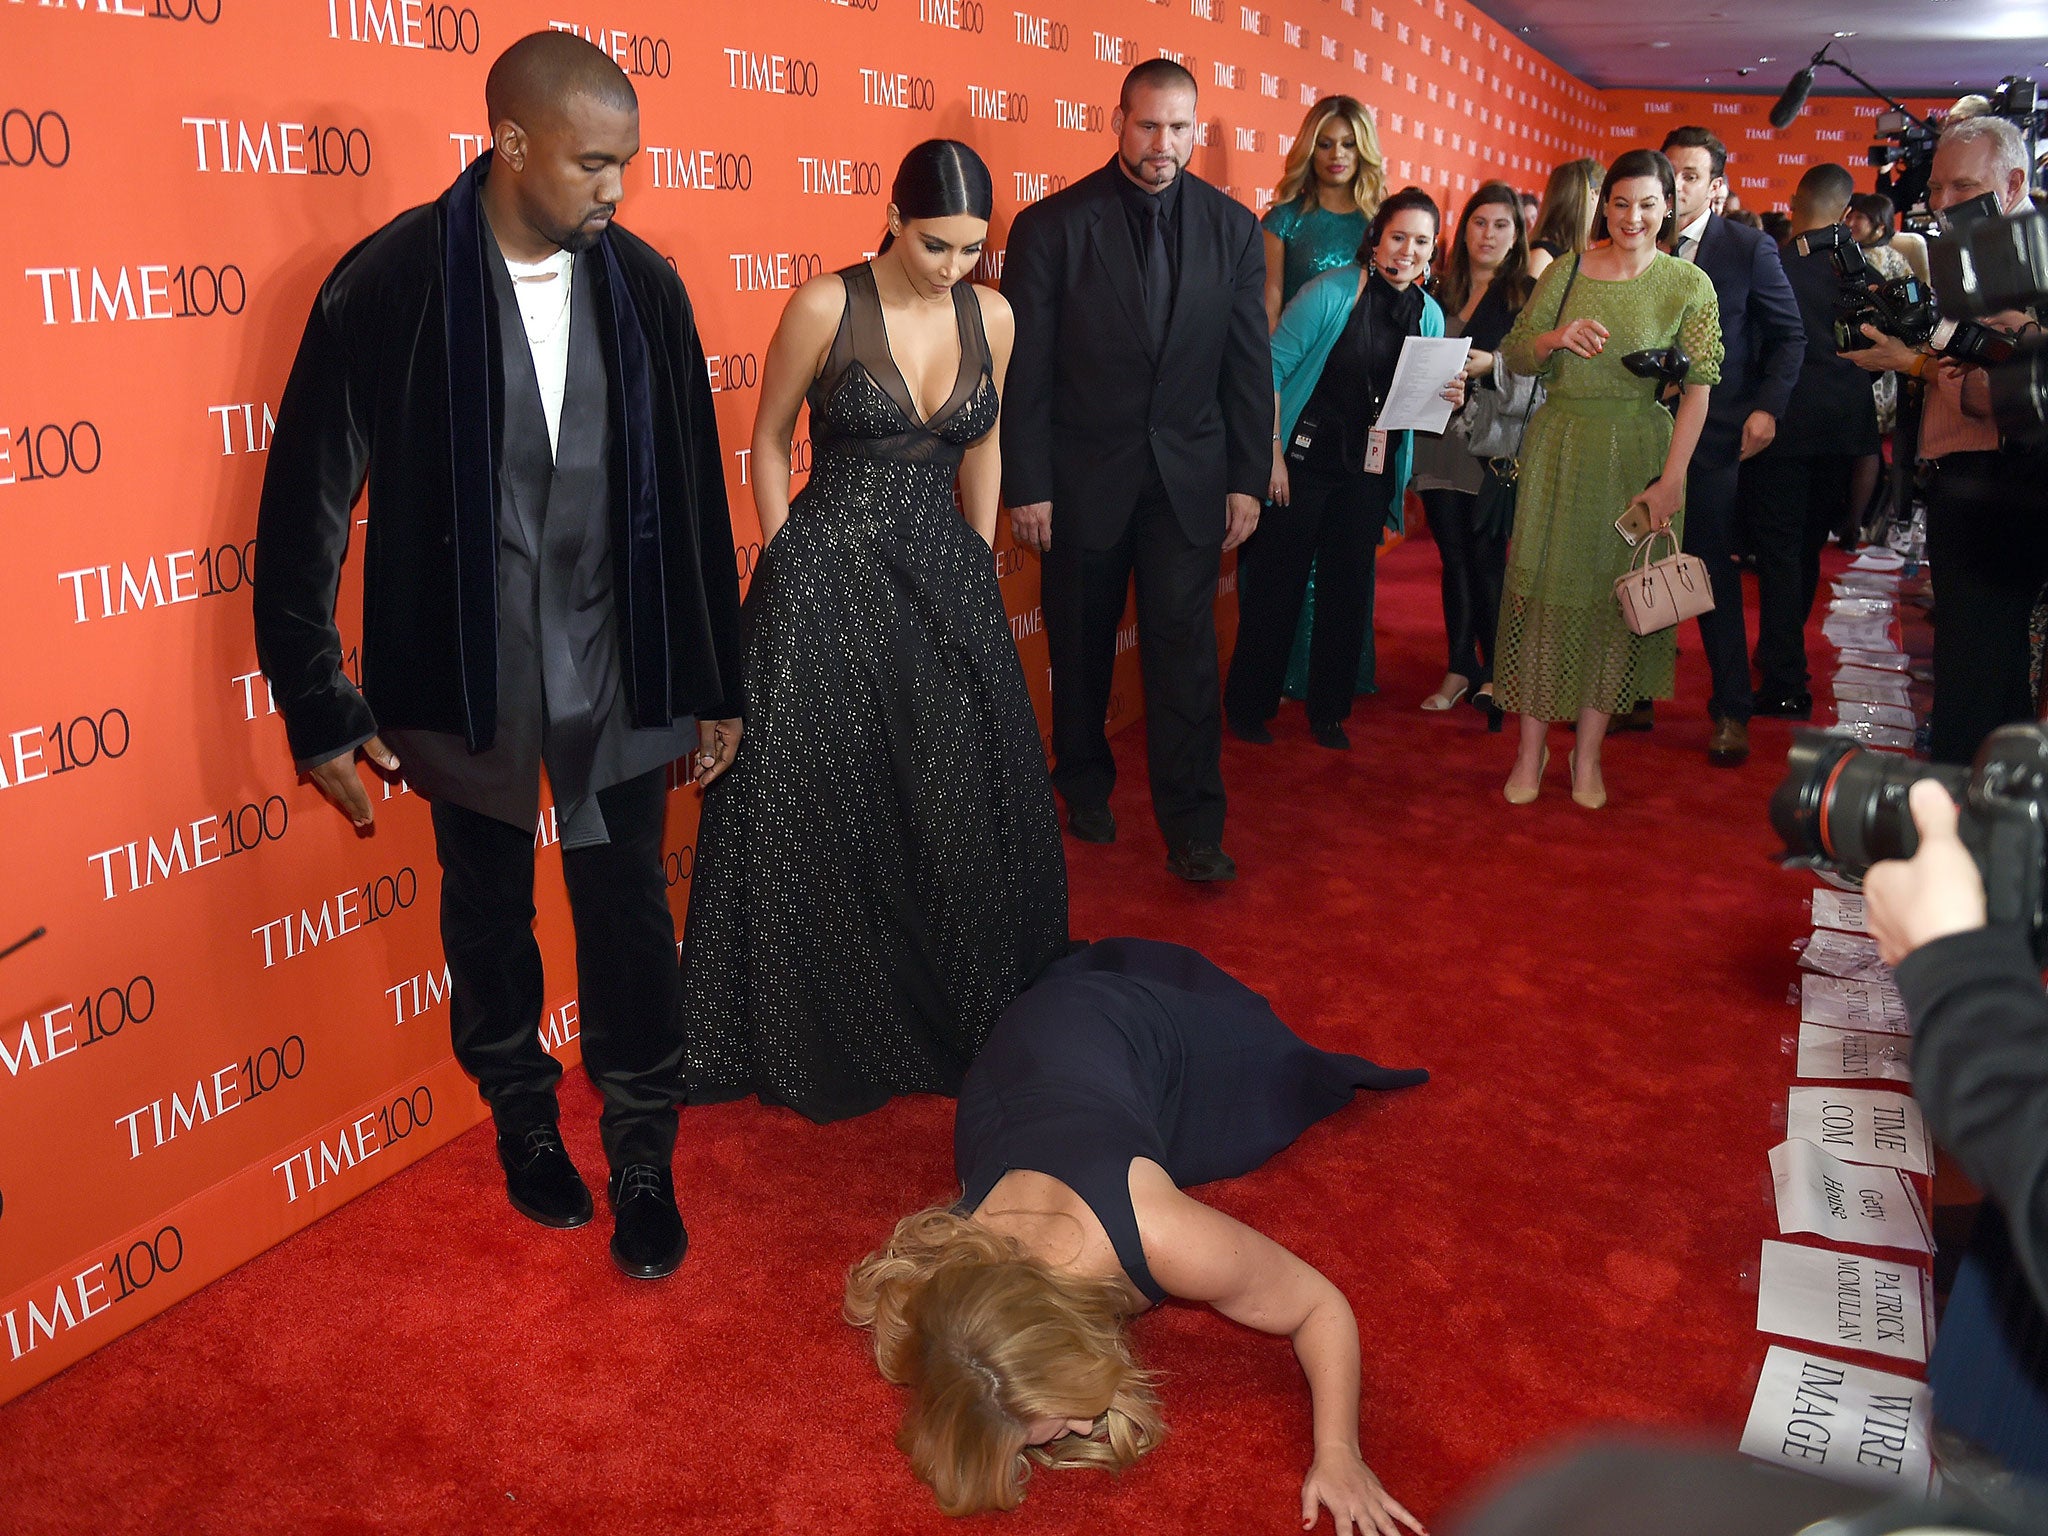 Amy Schumer pretends to trip and fall on the floor in front of honorees Kim Kardashian and Kanye West as they attend the Time 100 Gala celebrating the Time 100 issue of the Most Influential People at The World at Jazz at Lincoln Center in New York